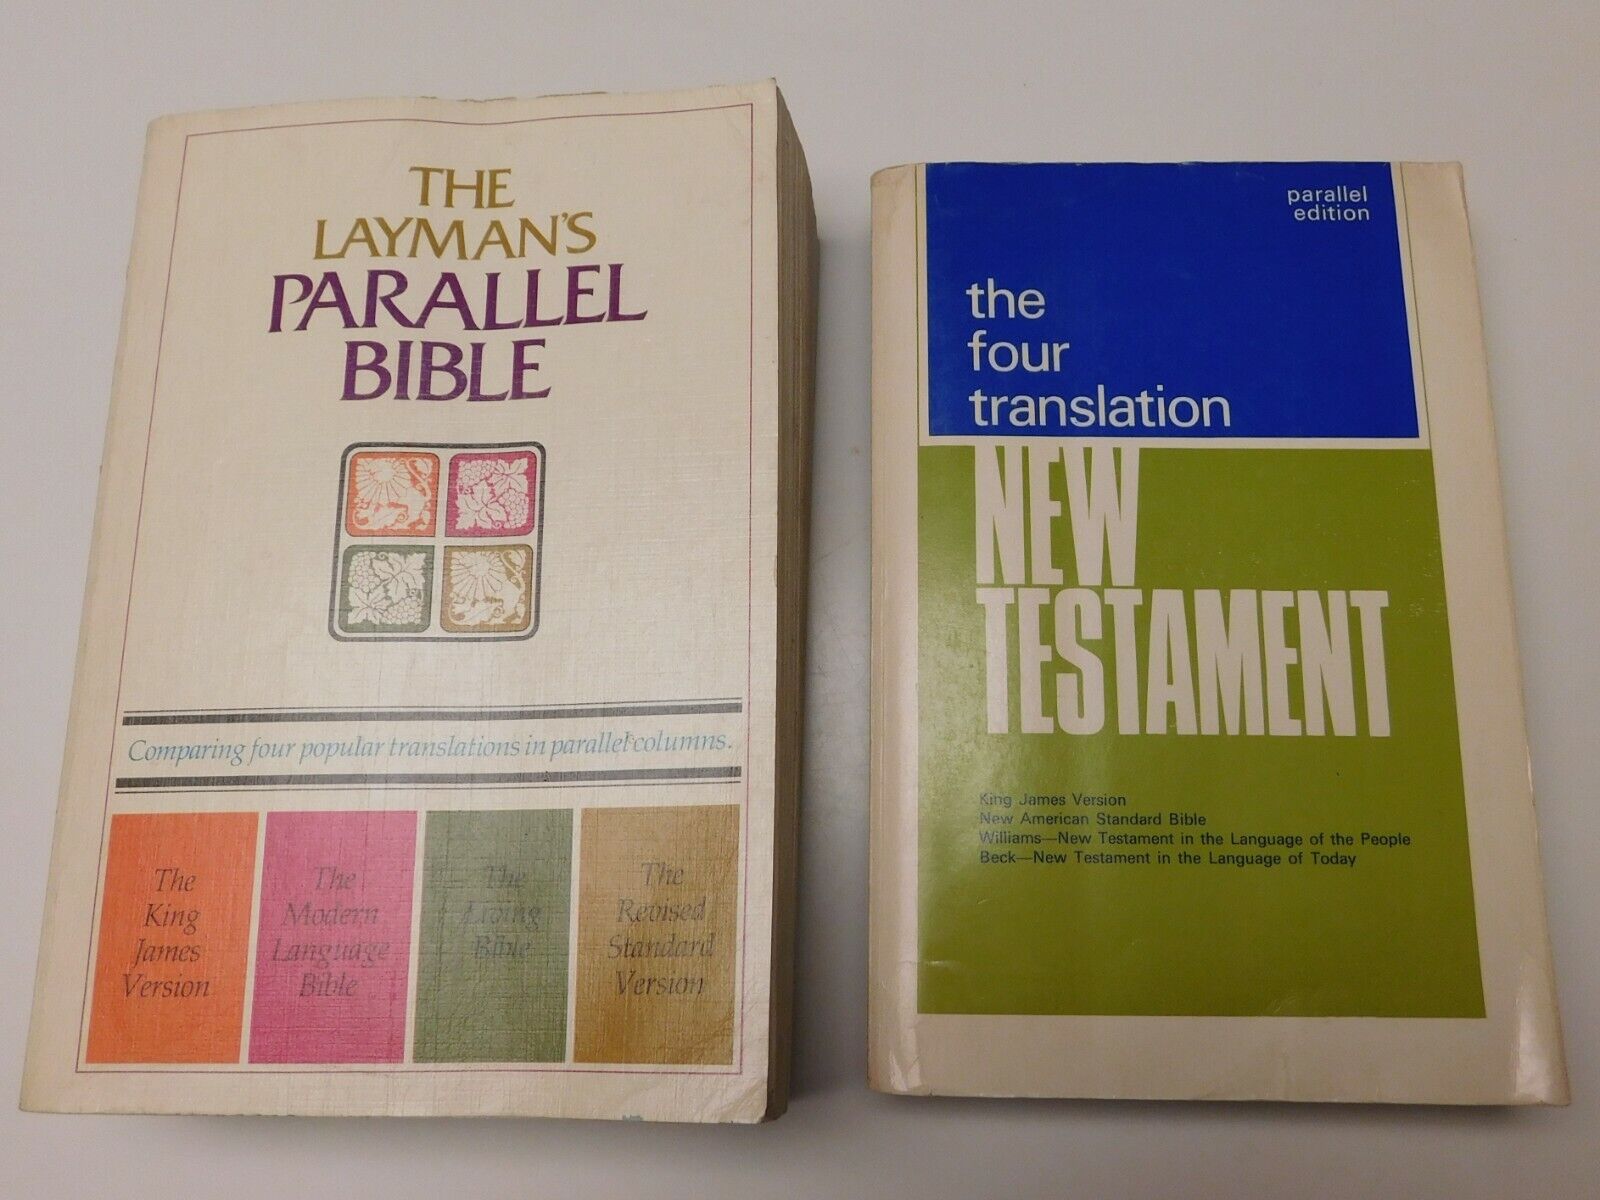 2 Bibles:  The Layman’s Parallel Bible and The Four Translation New Testament